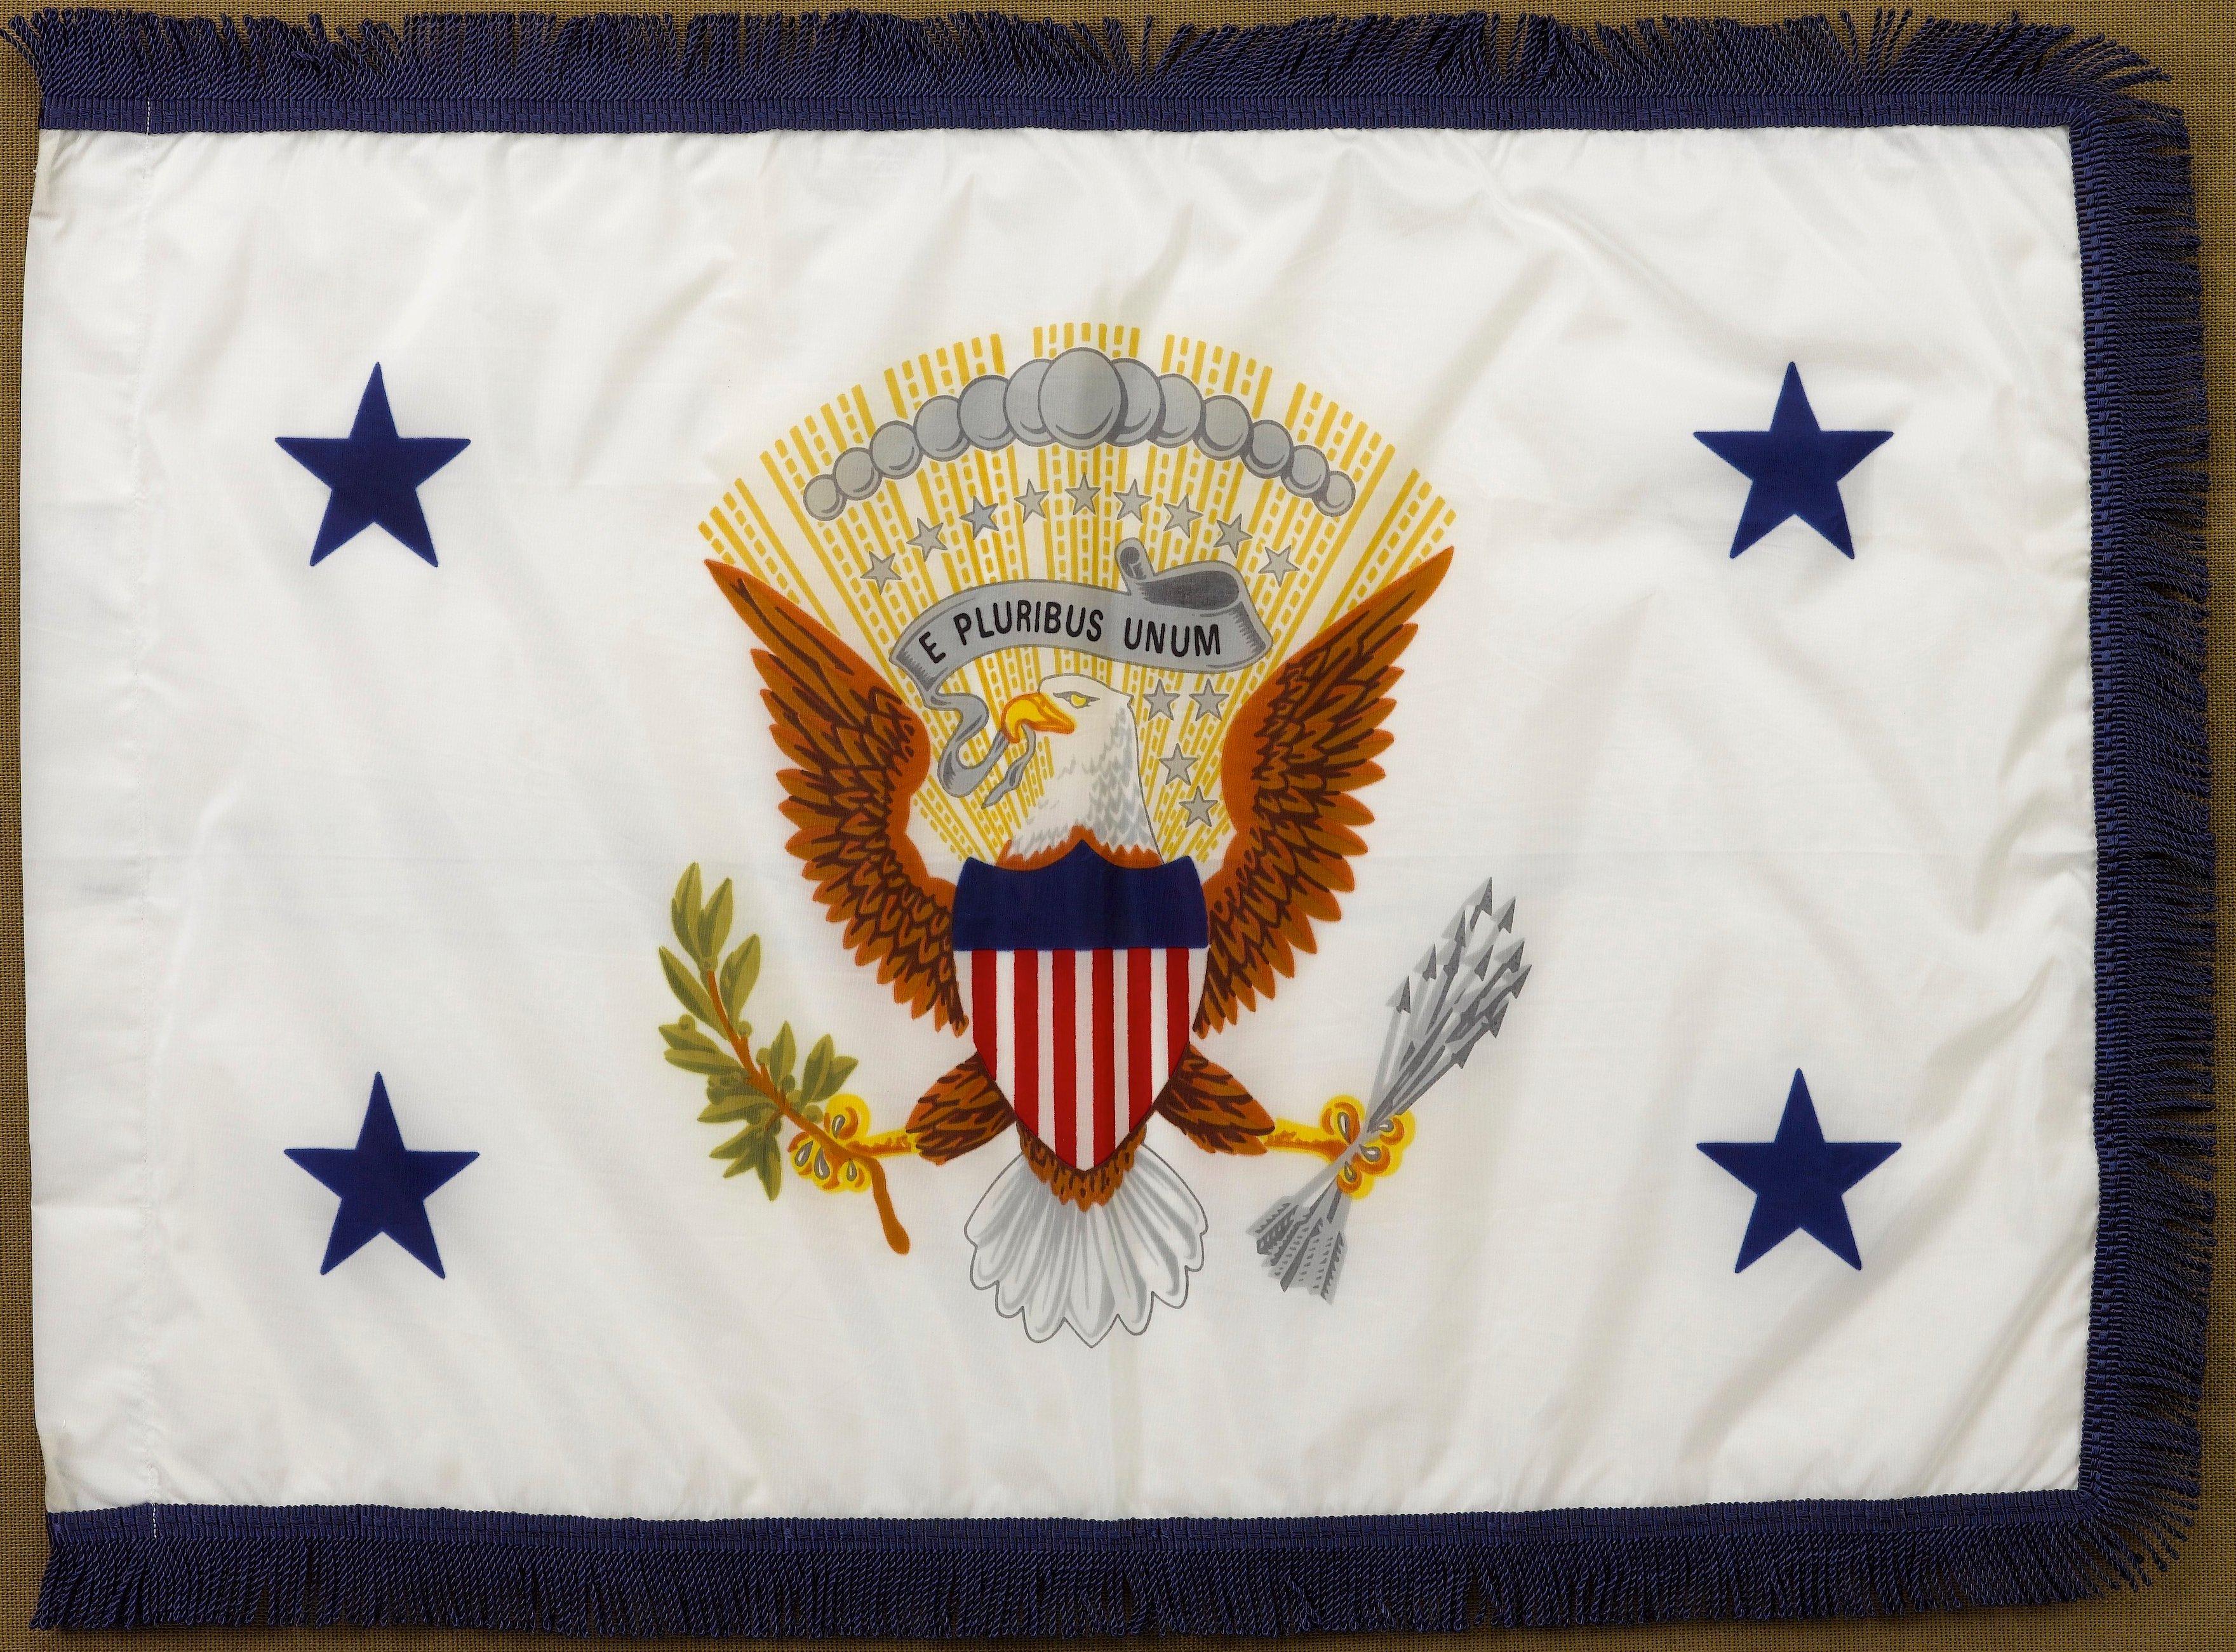 This is an original Vice Presidential limousine flag, flown when George H. W. Bush was Vice President.

This white limousine flag has the Presidential Seal at center and blue five-pointed stars in each of the four corners. The flag has a blue